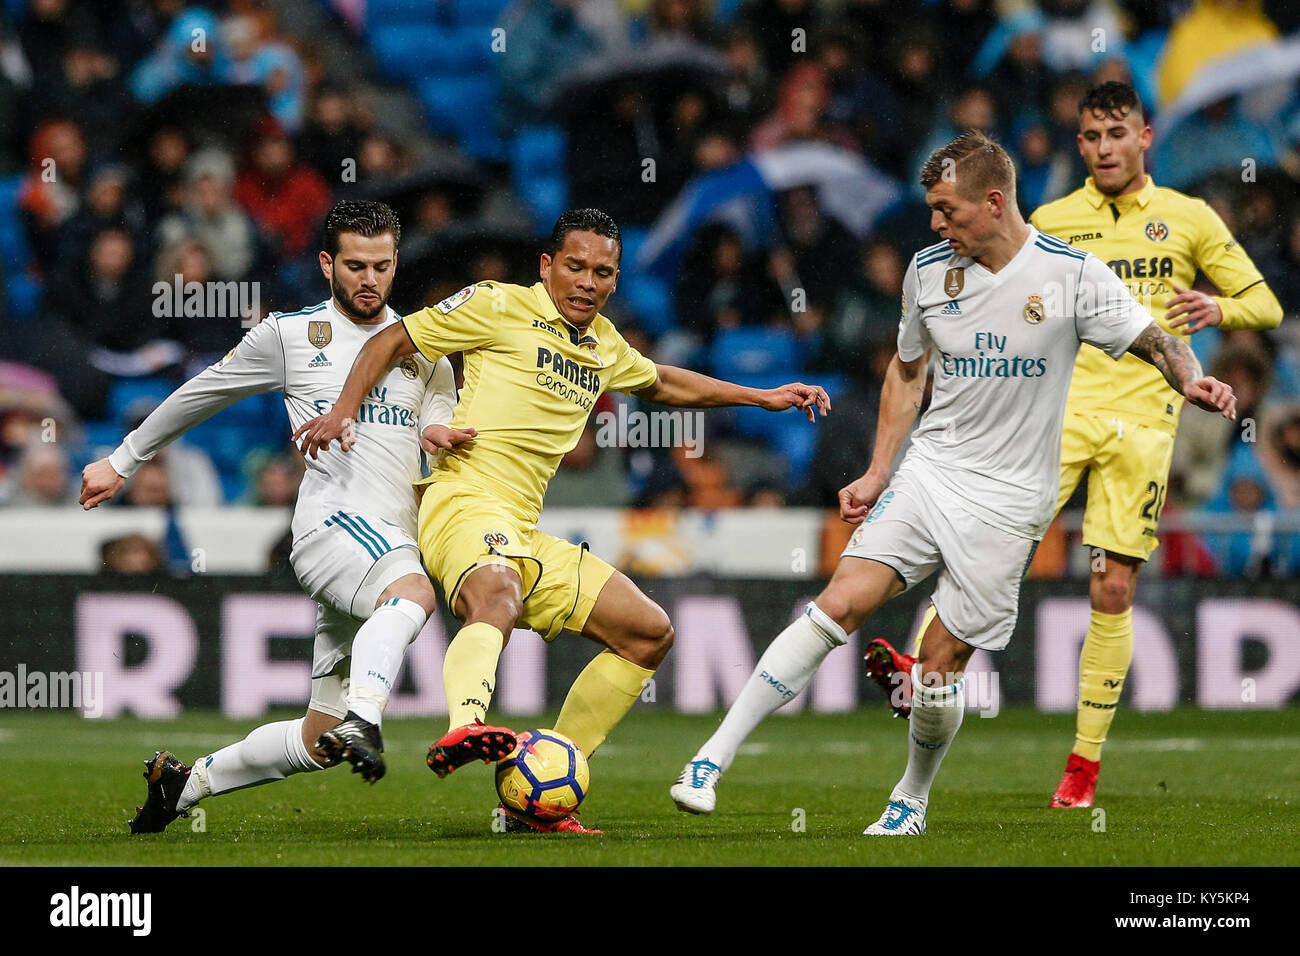 Carlos Bacca (Villerreal CF) fights for control of the ball Jose I. Fernandez, NACHO (Real Madrid), La Liga match between Real Madrid vs Villerreal CF at the Santiago Bernabeu stadium in Madrid, Spain, January 13, 2018. Credit: Gtres Información más Comuniación on line, S.L./Alamy Live News Stock Photo